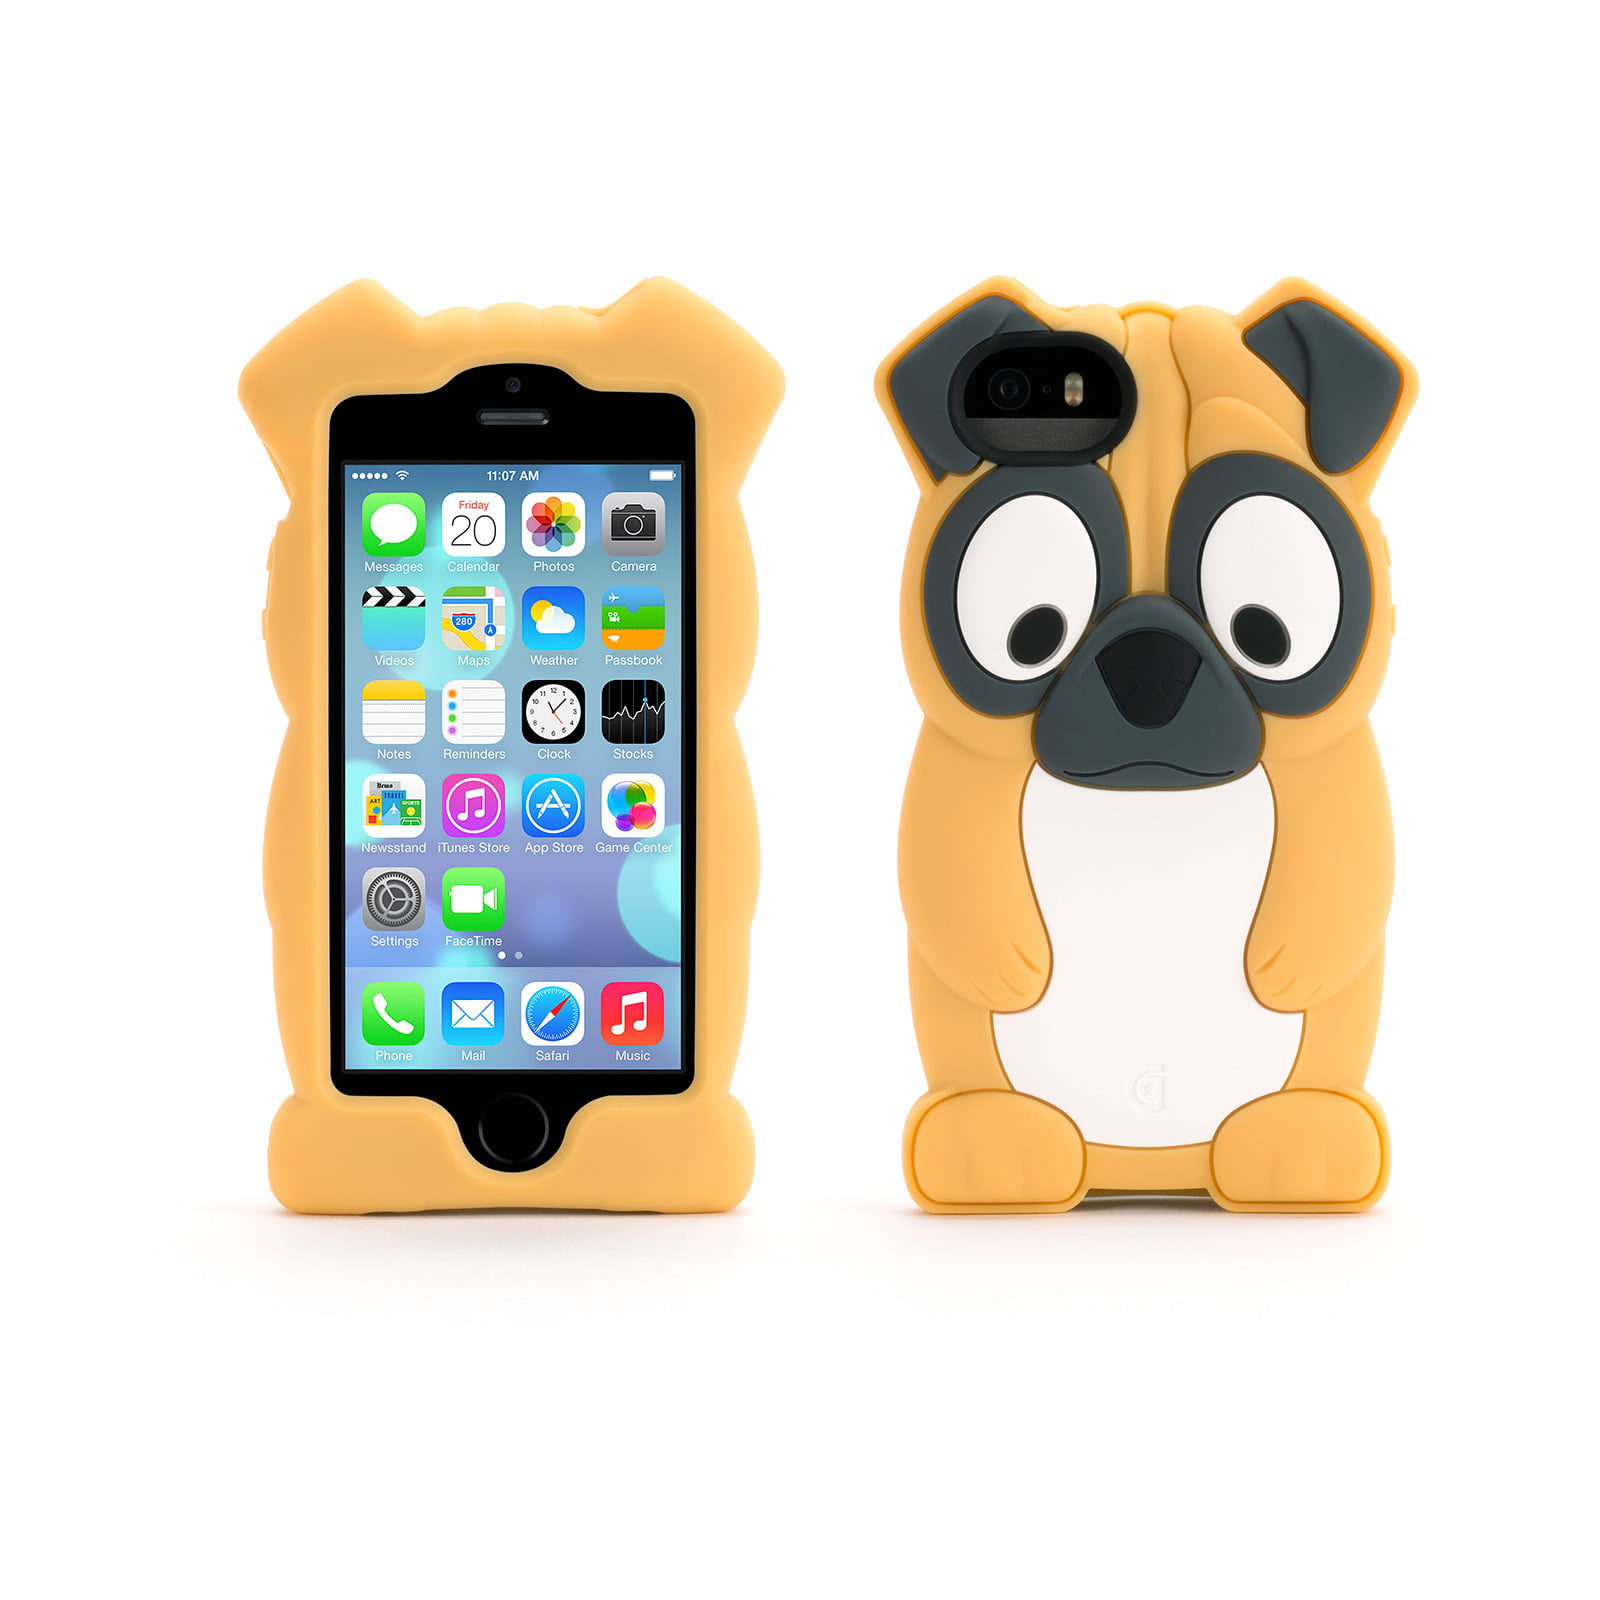 iPhone 5S Case Tznzxm New 3D Cartoon Animals Character Shockproof Full Protective Soft Silicone Rubber Anti-Scratch Non-Slip Phone Back Case for iPhone 5S 5 SE Cat iPhone 5 Case,iPhone SE Case 